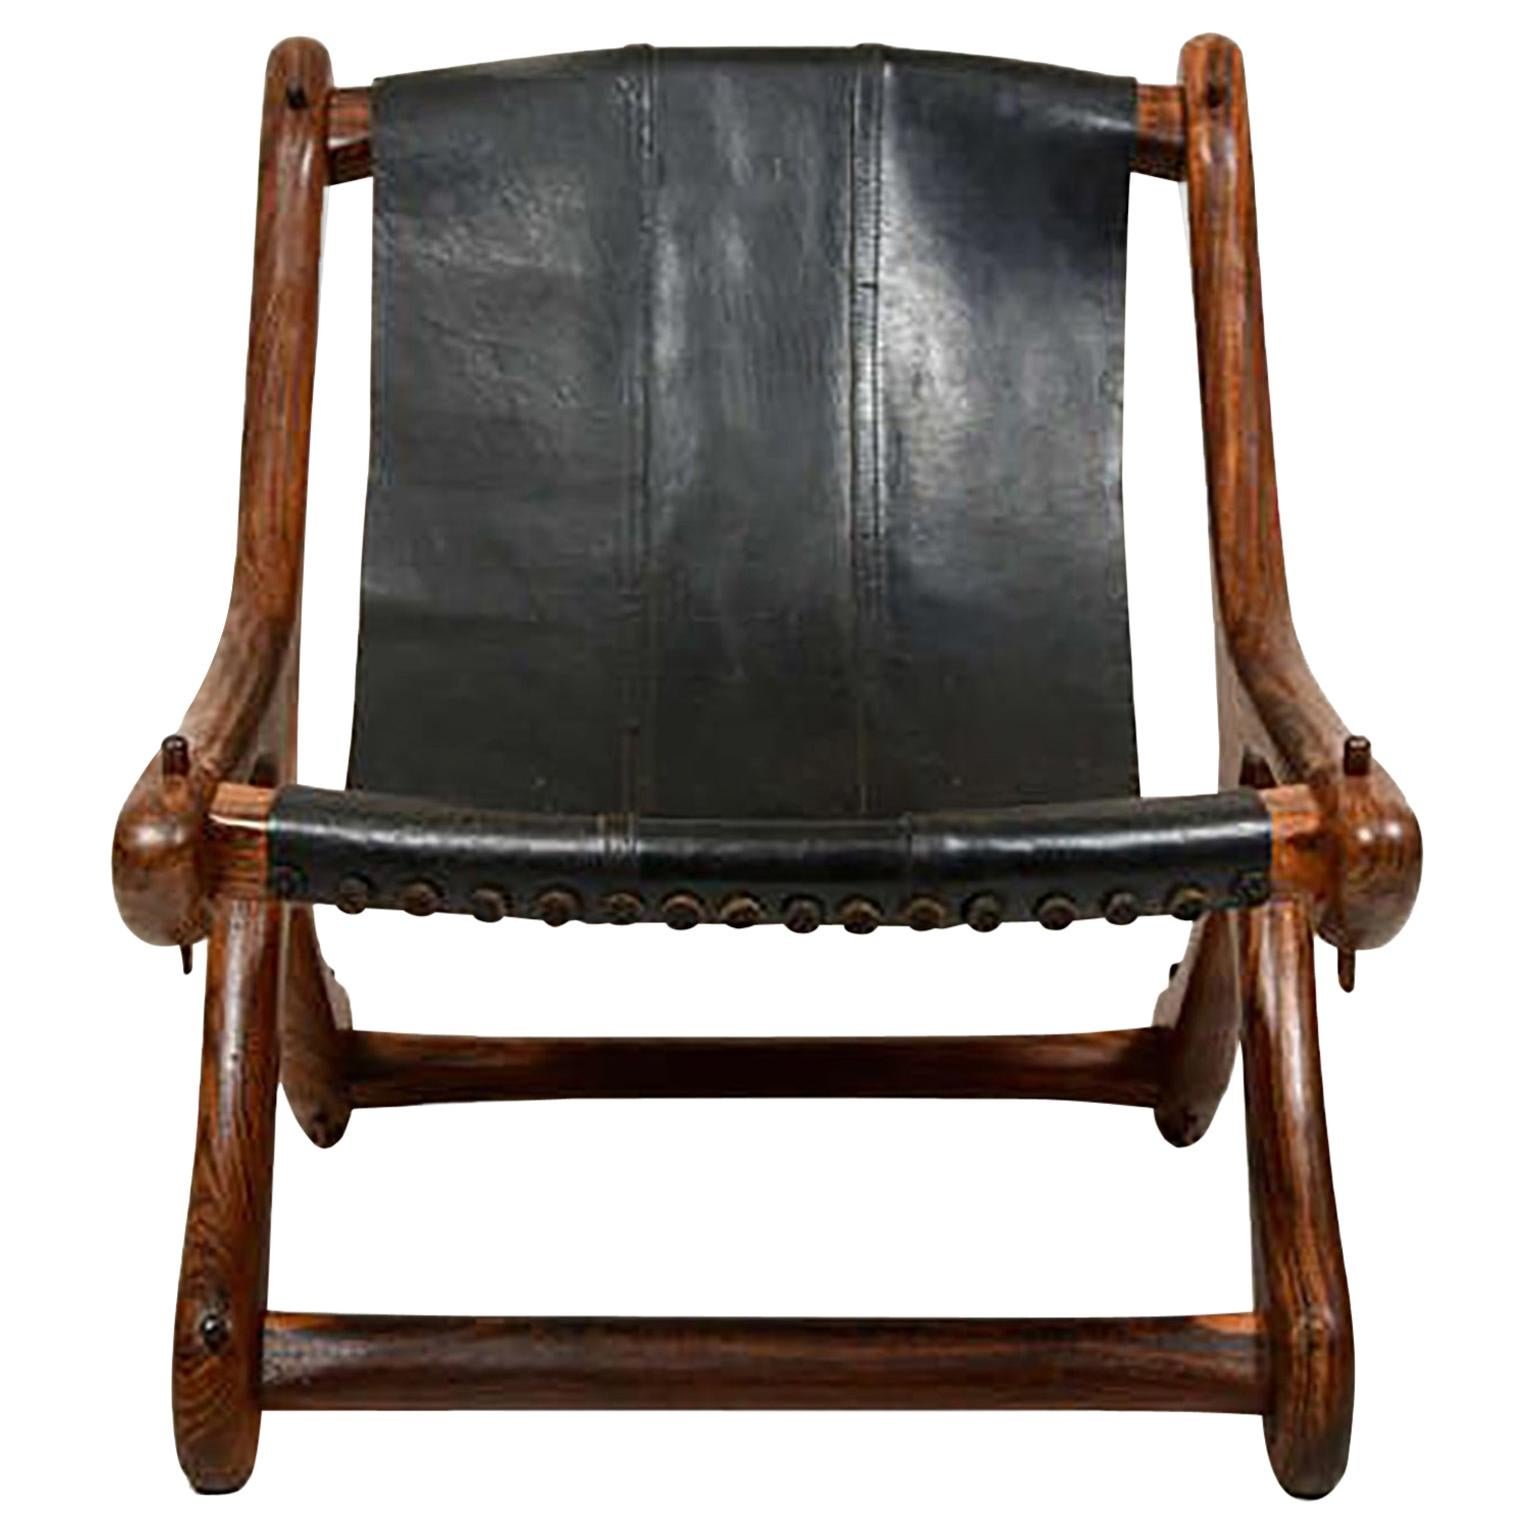 AMBIANIC presents
Modern SLOUCHER Leather SLING Chair in Exotic Wood designed and produced by famed modernist, Don S Shoemaker. Mexico, 1960s
Rare Solid Cocobolo Wood frame with Black leather Sling Seat.
Ghost shadow is present where the original